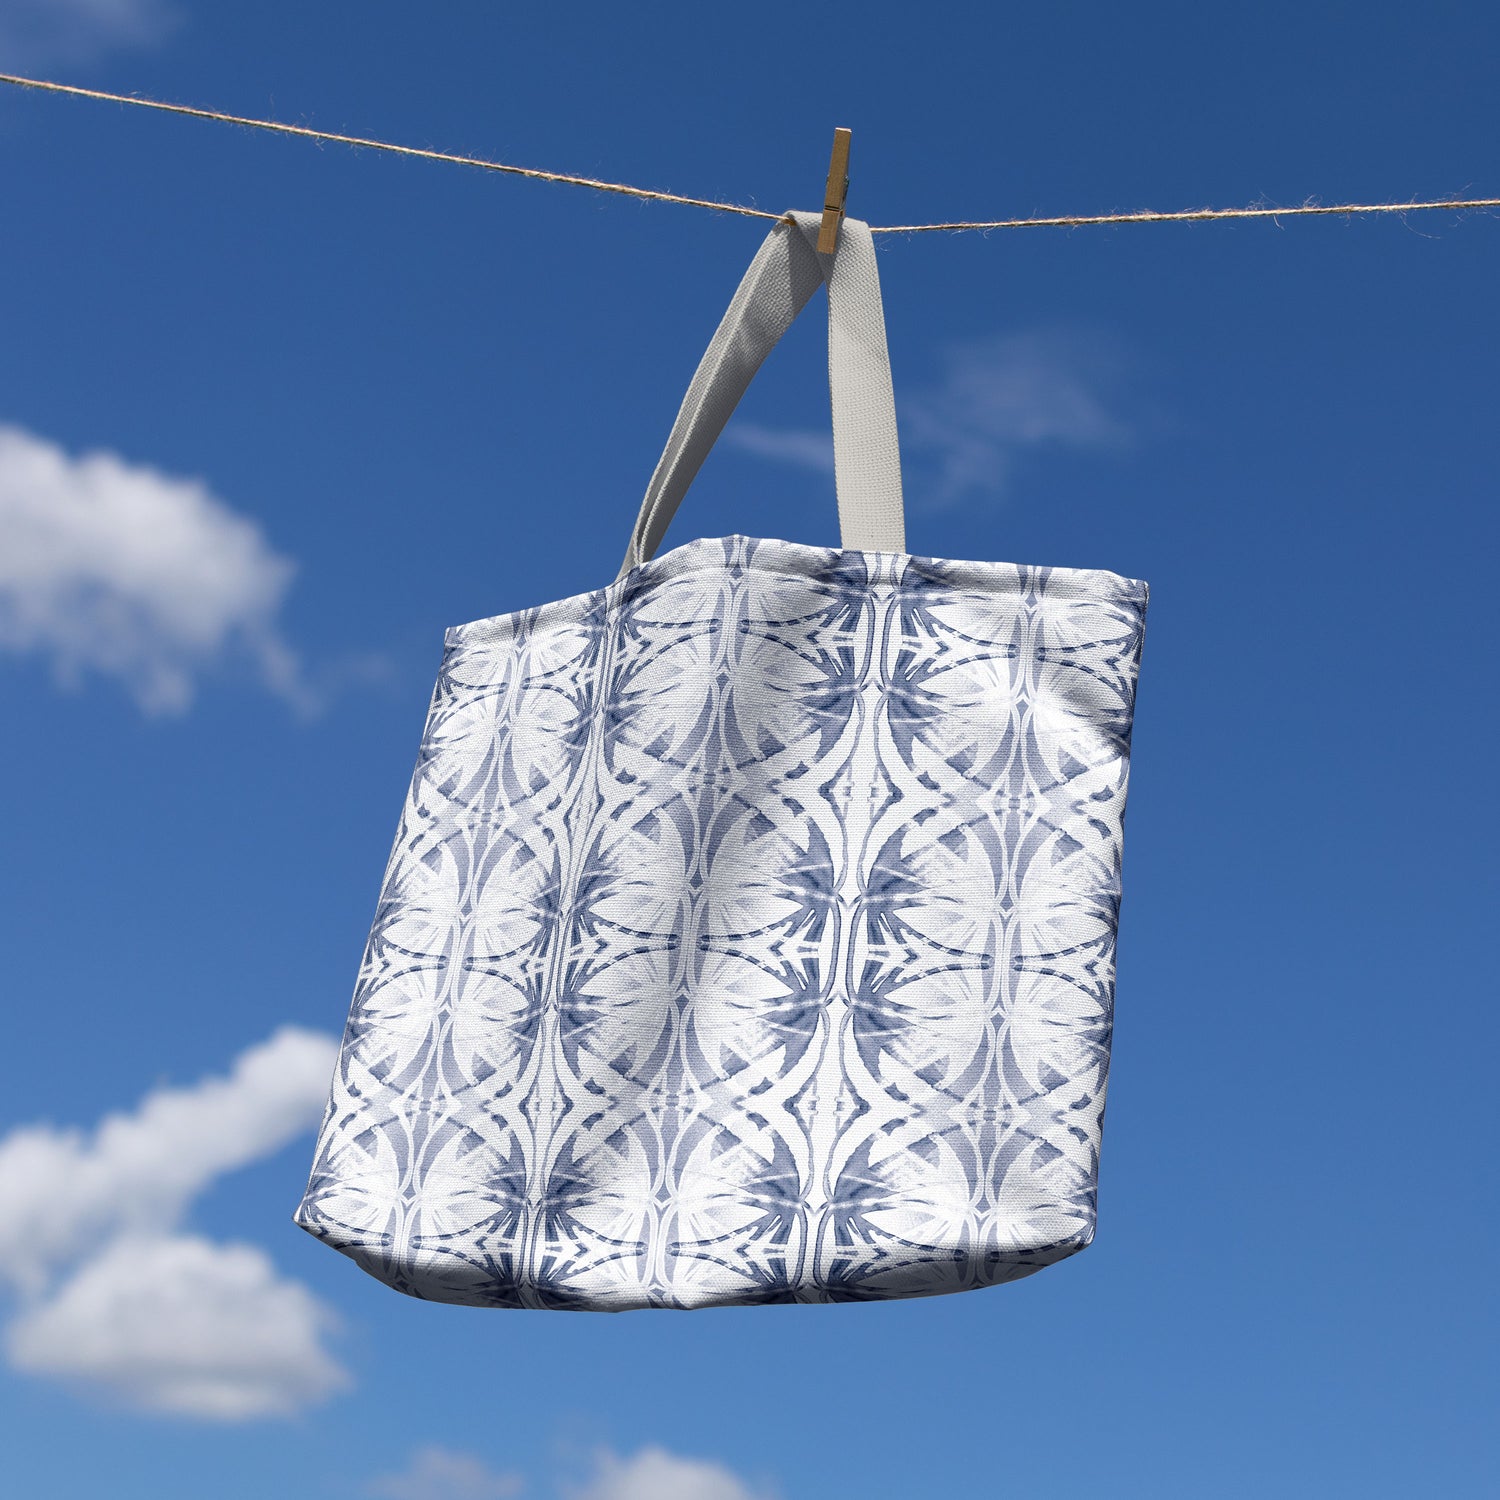 Large tote bag featuring a blue and white abstract pattern, hanging from a clothesline with a bright blue sky background.